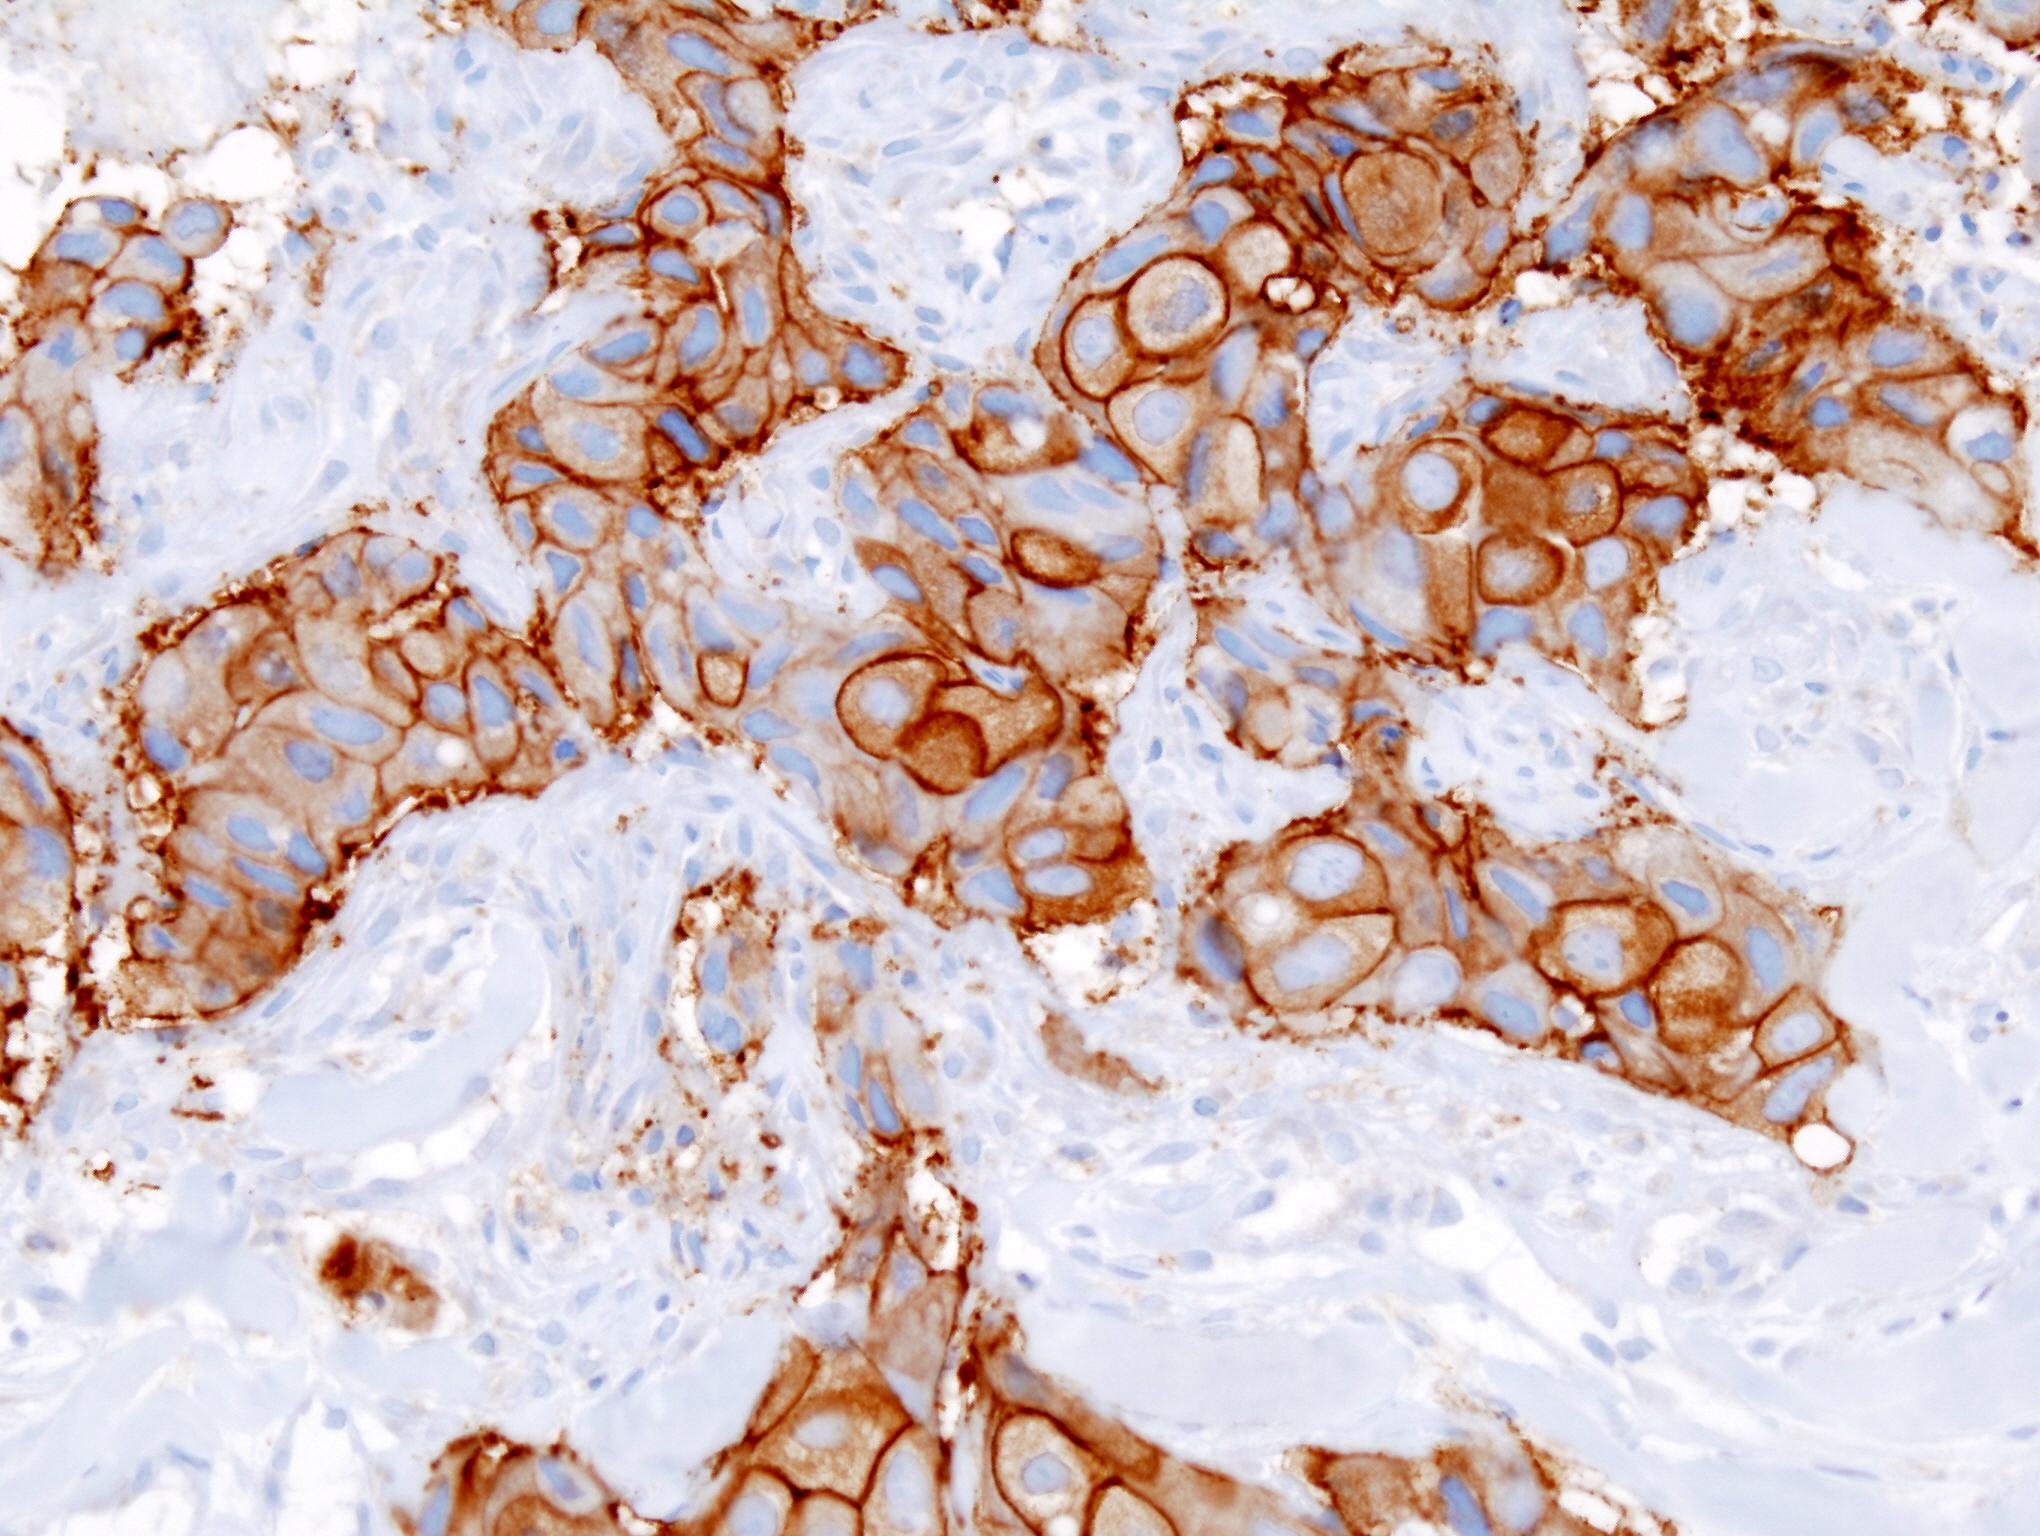 Histopathology of invasive ductal carcinoma of the breast representing a scirrhous growth. Core needle biopsy. HER-2/neu oncoprotein expression by Ventana immunostaining system.